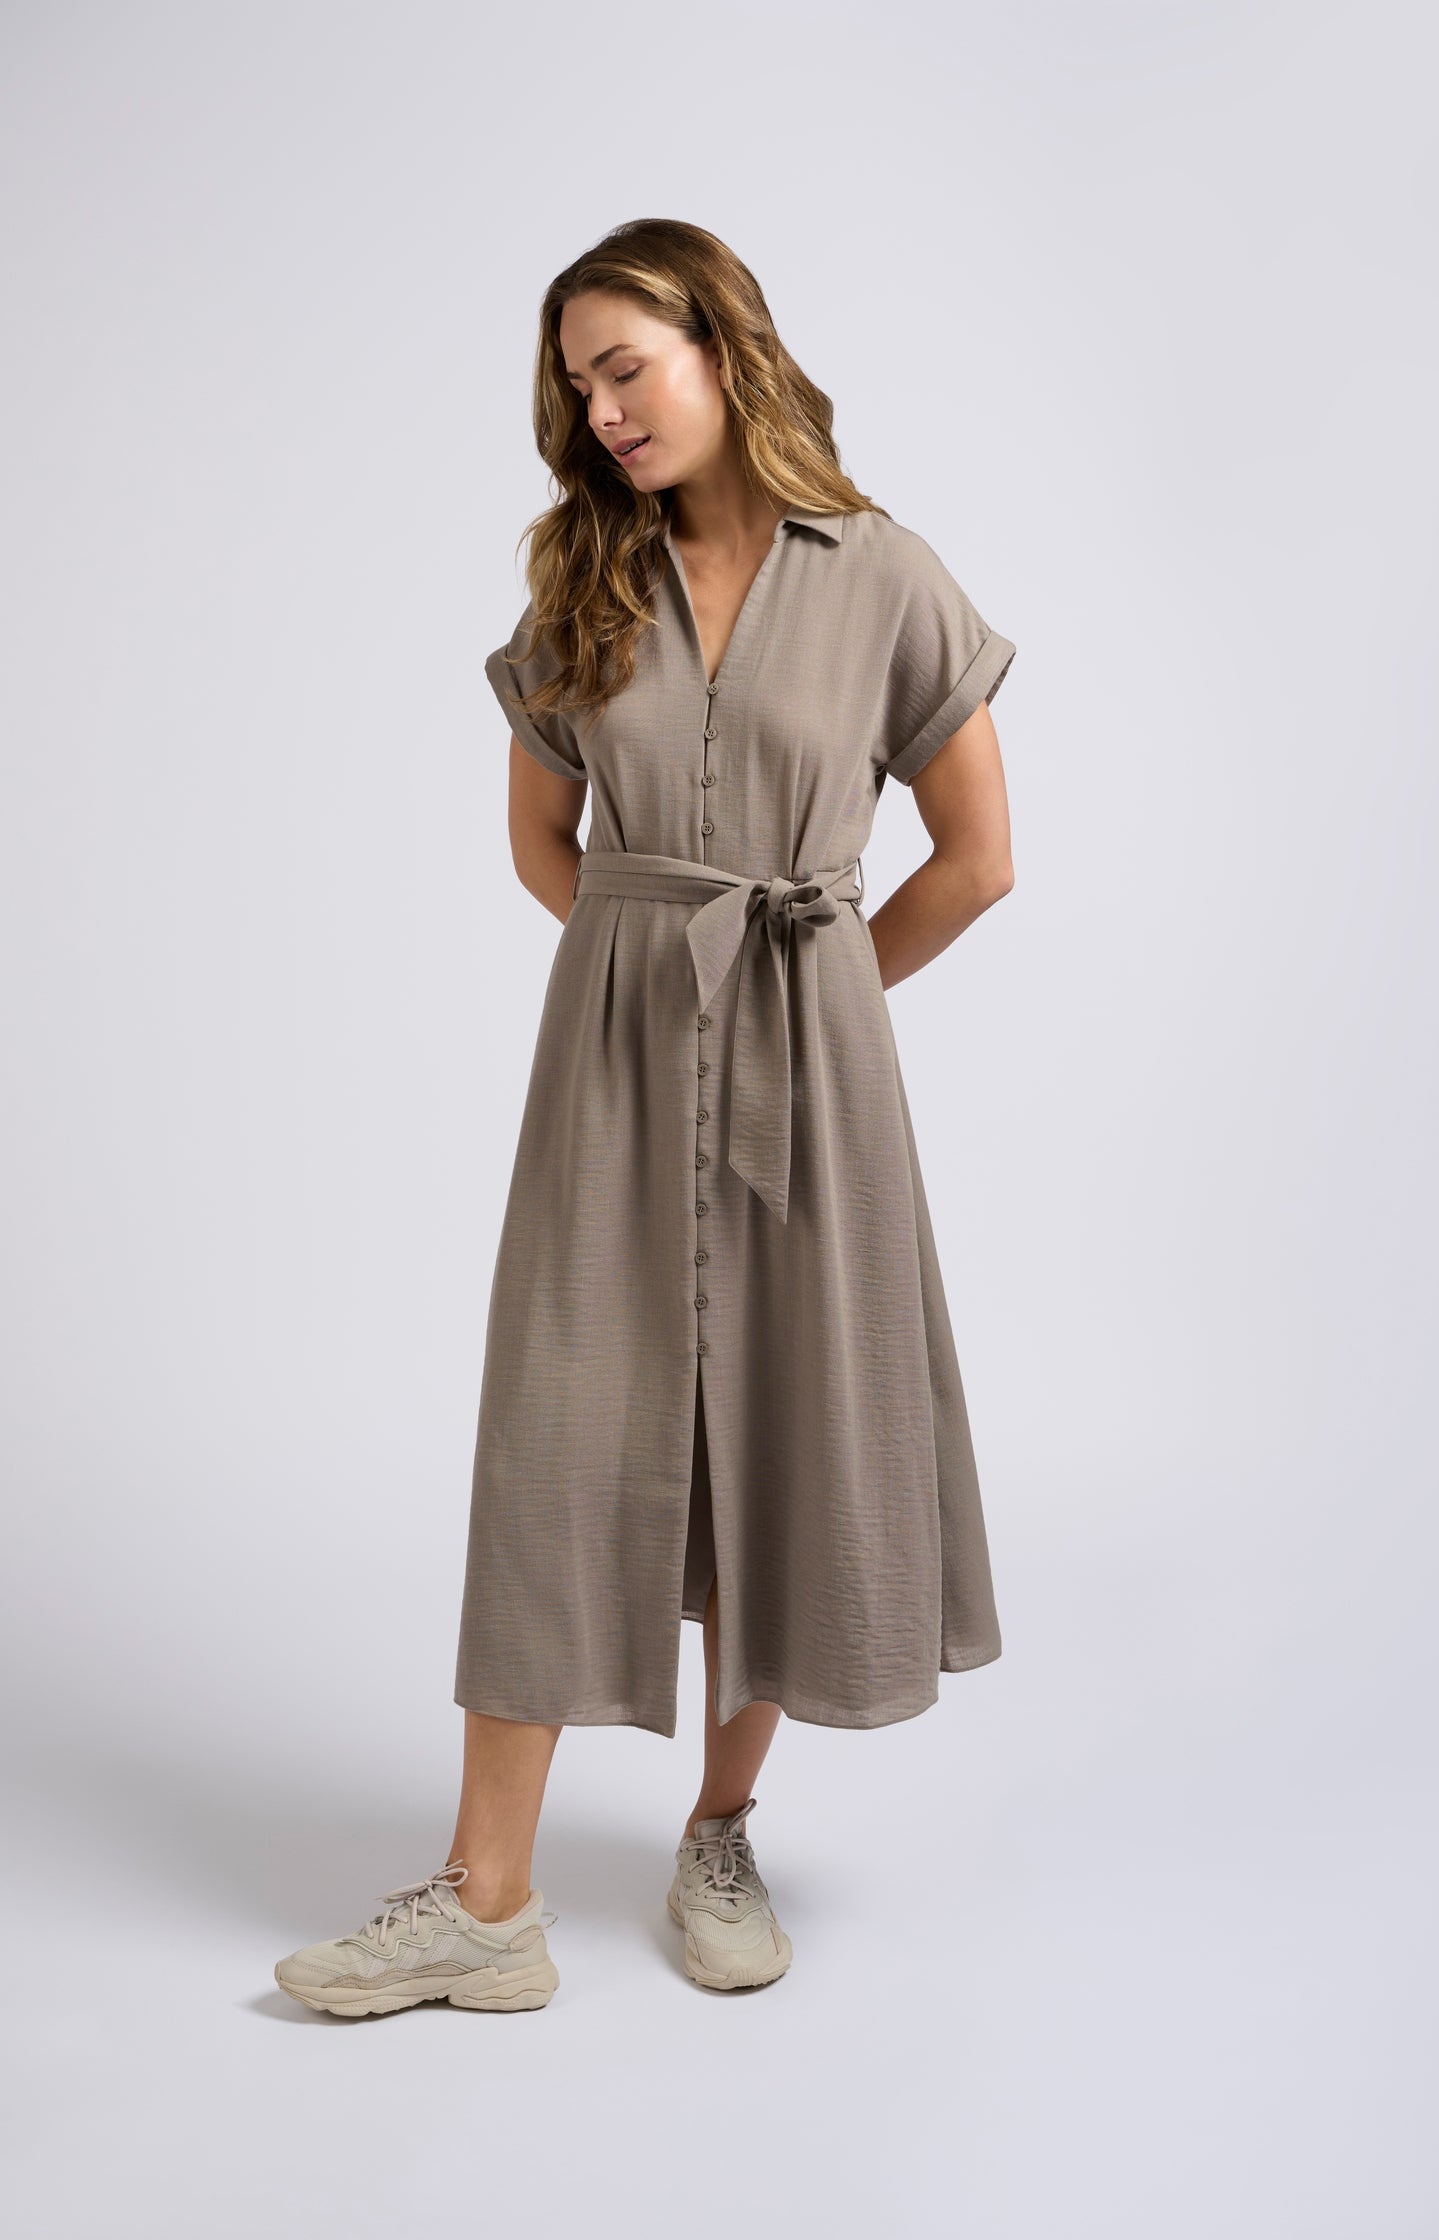 Woven midi dress with short sleeves and tie belt - Type: lookbook